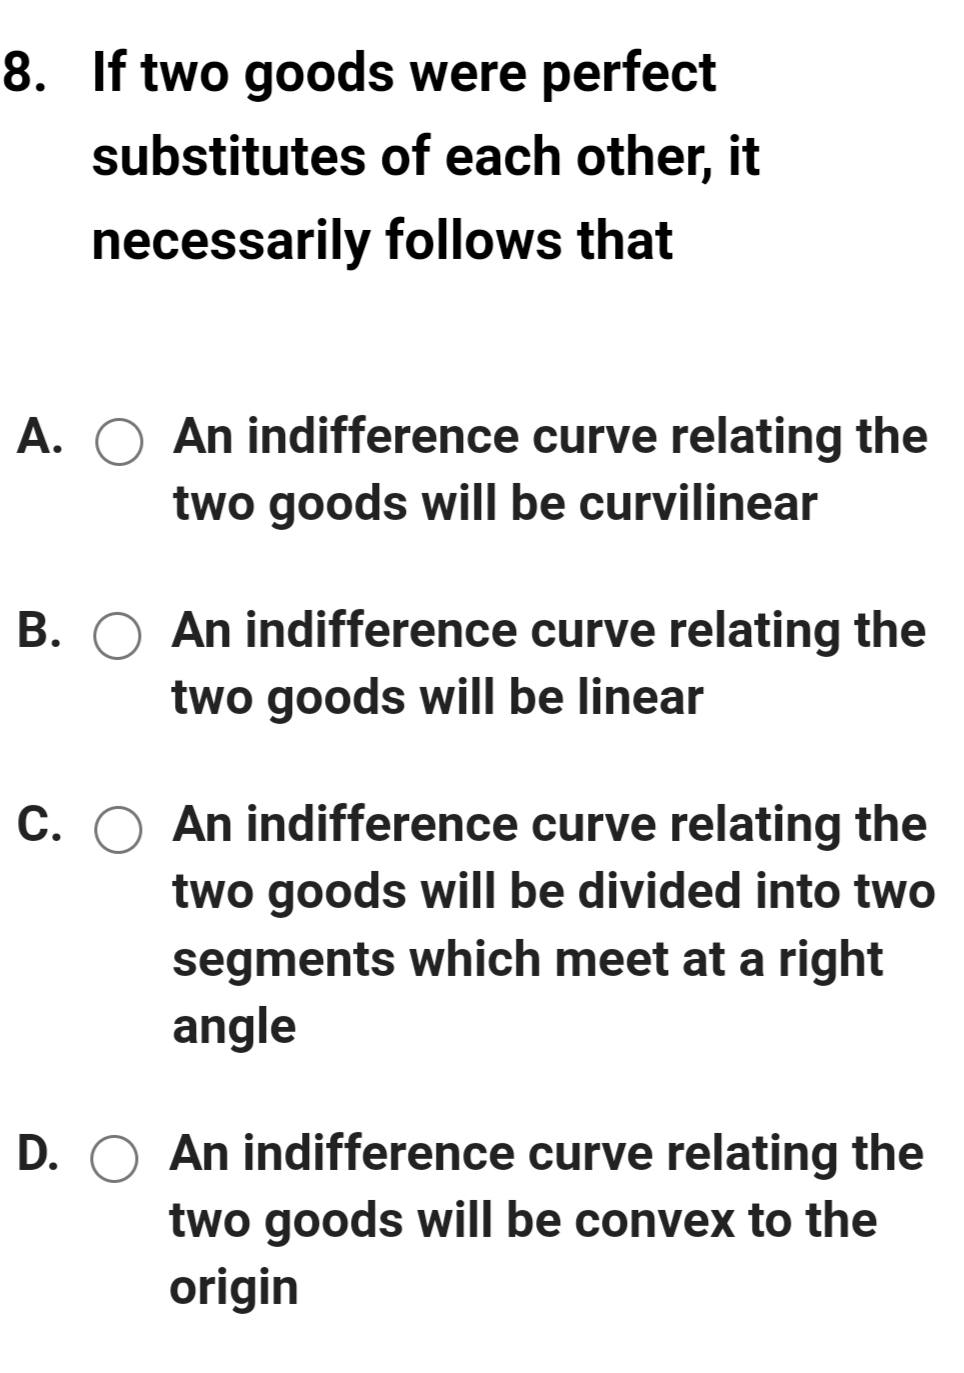 8. If two goods were perfect
substitutes of each other, it
necessarily follows that
A.
An indifference curve relating the
two goods will be curvilinear
B. O An indifference curve relating the
two goods will be linear
C. O An indifference curve relating the
two goods will be divided into two
segments which meet at a right
angle
D. O An indifference curve relating the
two goods will be convex to the
origin
